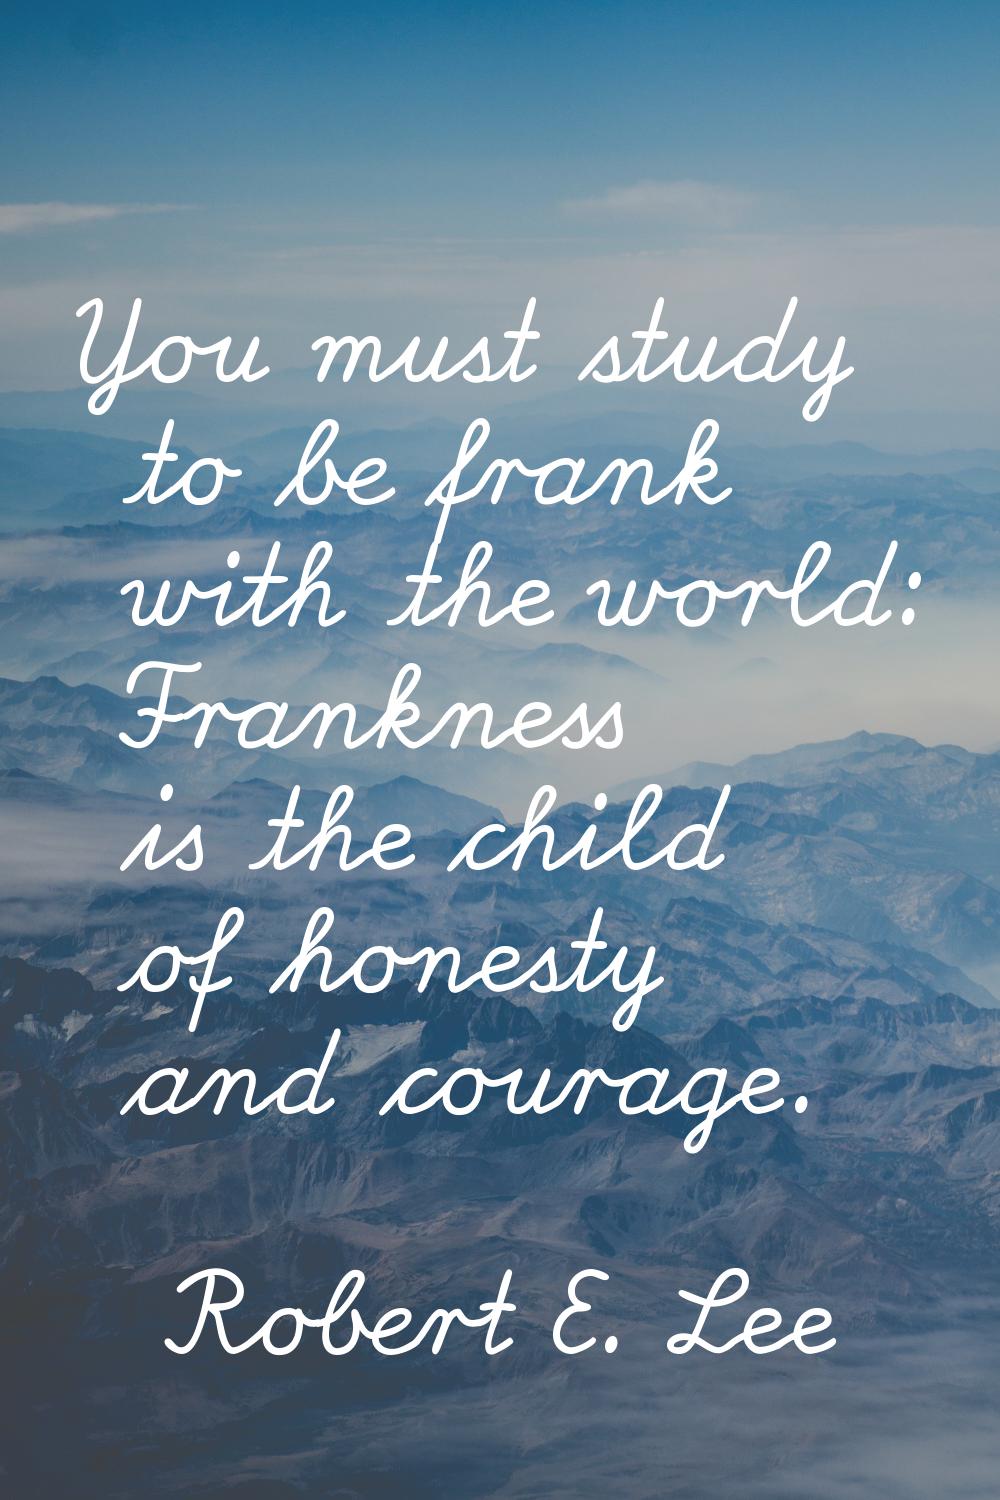 You must study to be frank with the world: Frankness is the child of honesty and courage.